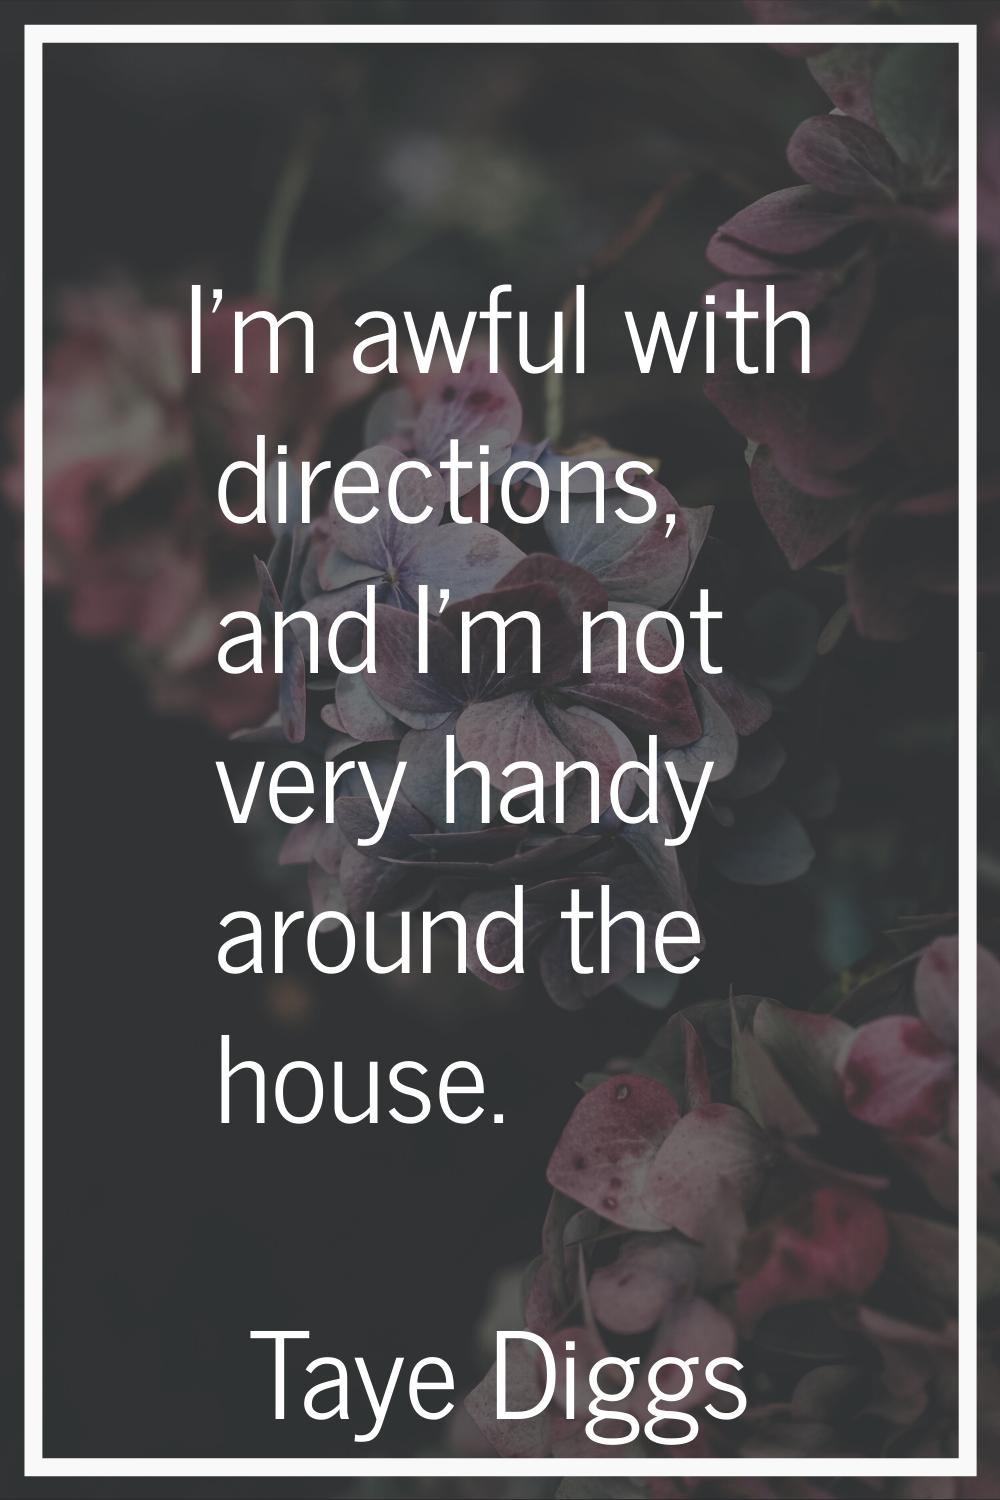 I'm awful with directions, and I'm not very handy around the house.